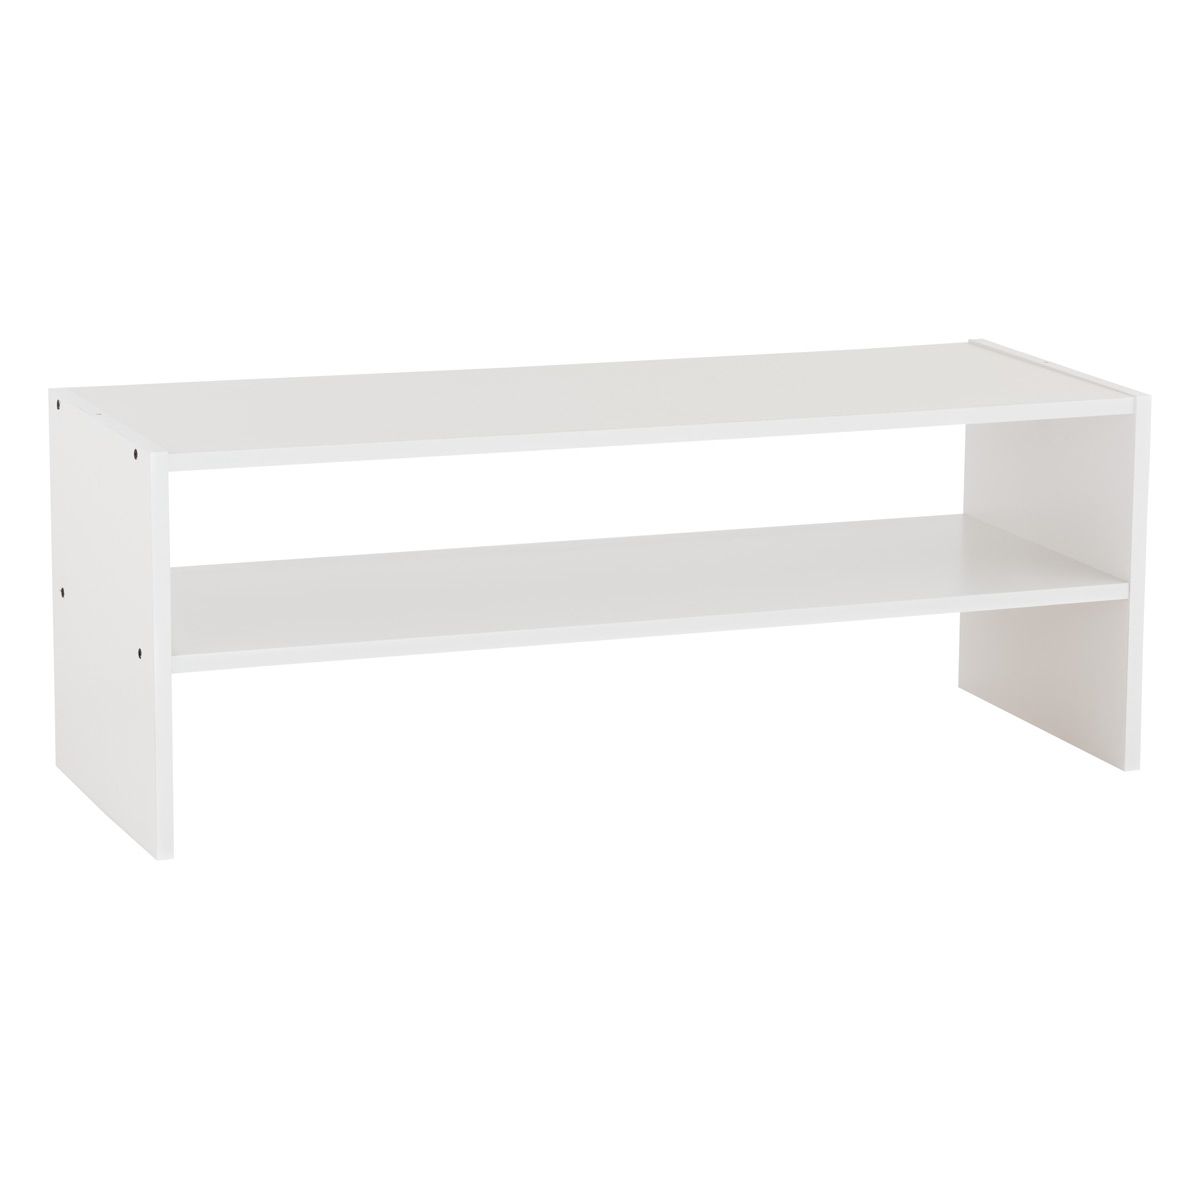 2-Shelf Shoe Stacker White | The Container Store